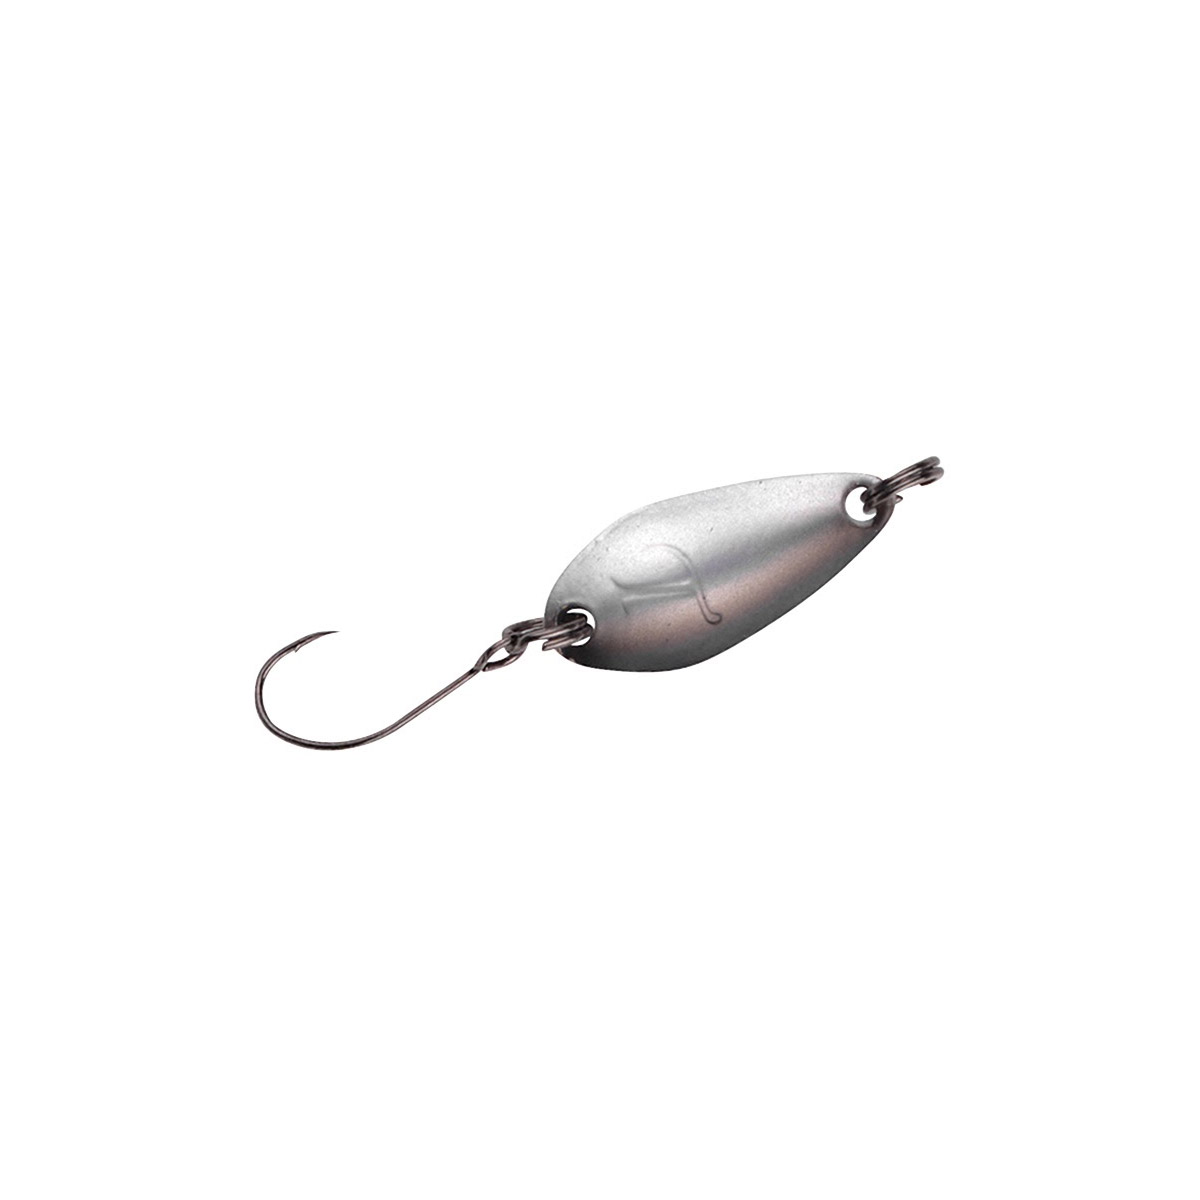 Spro Trout Master Incy Spoon 3,5 Gram -  Minnow 